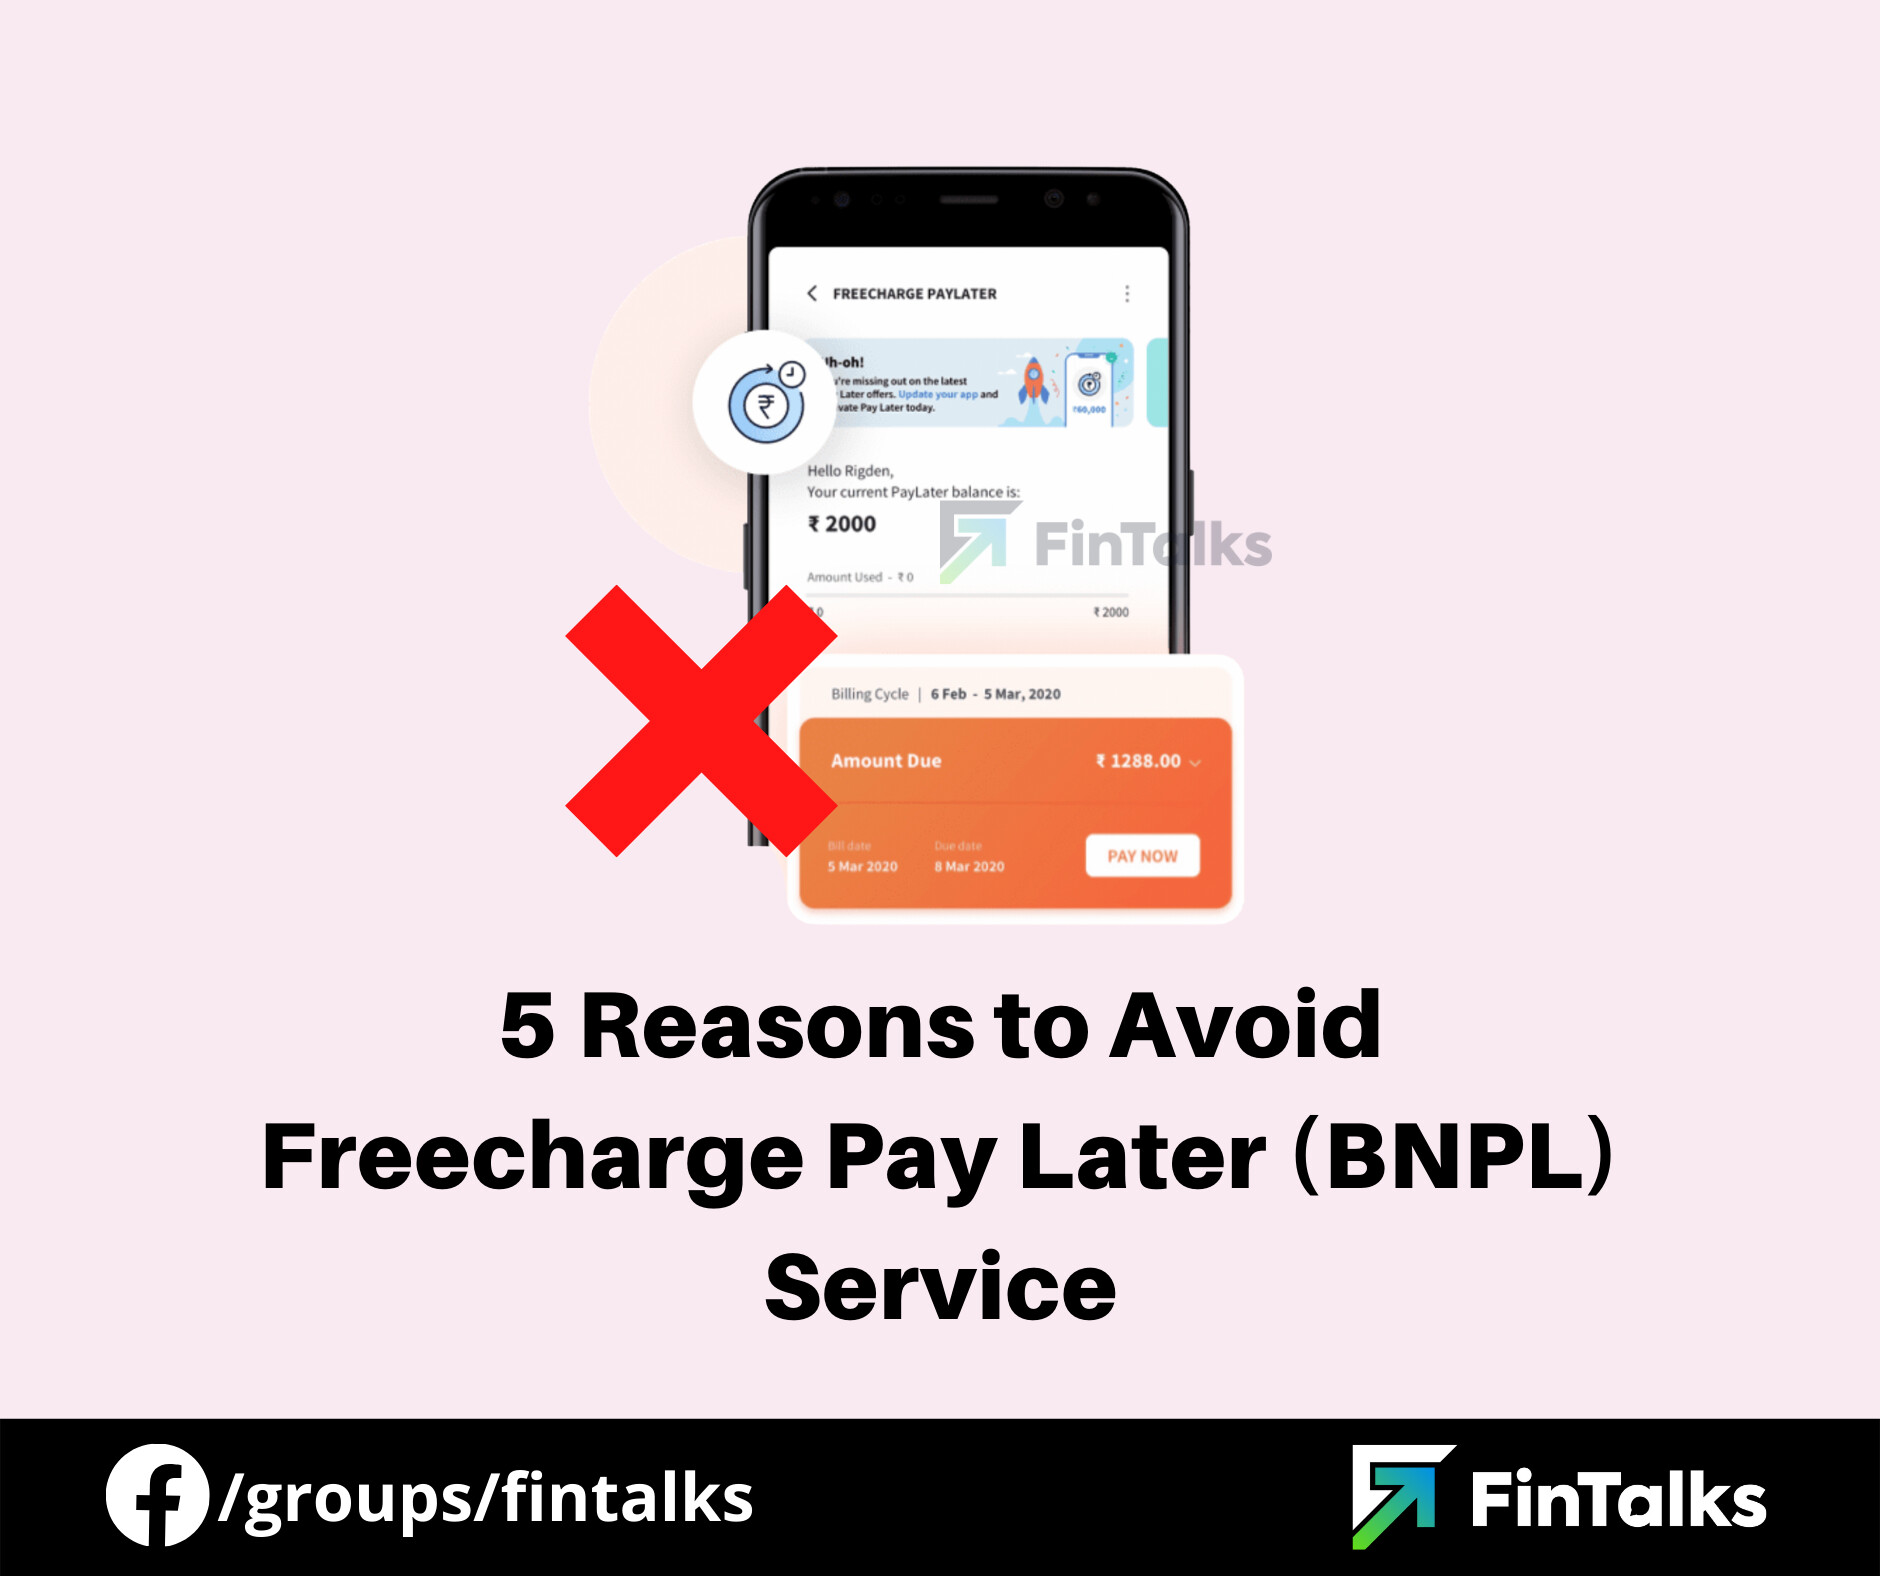 Where will I find my Freecharge Balance?